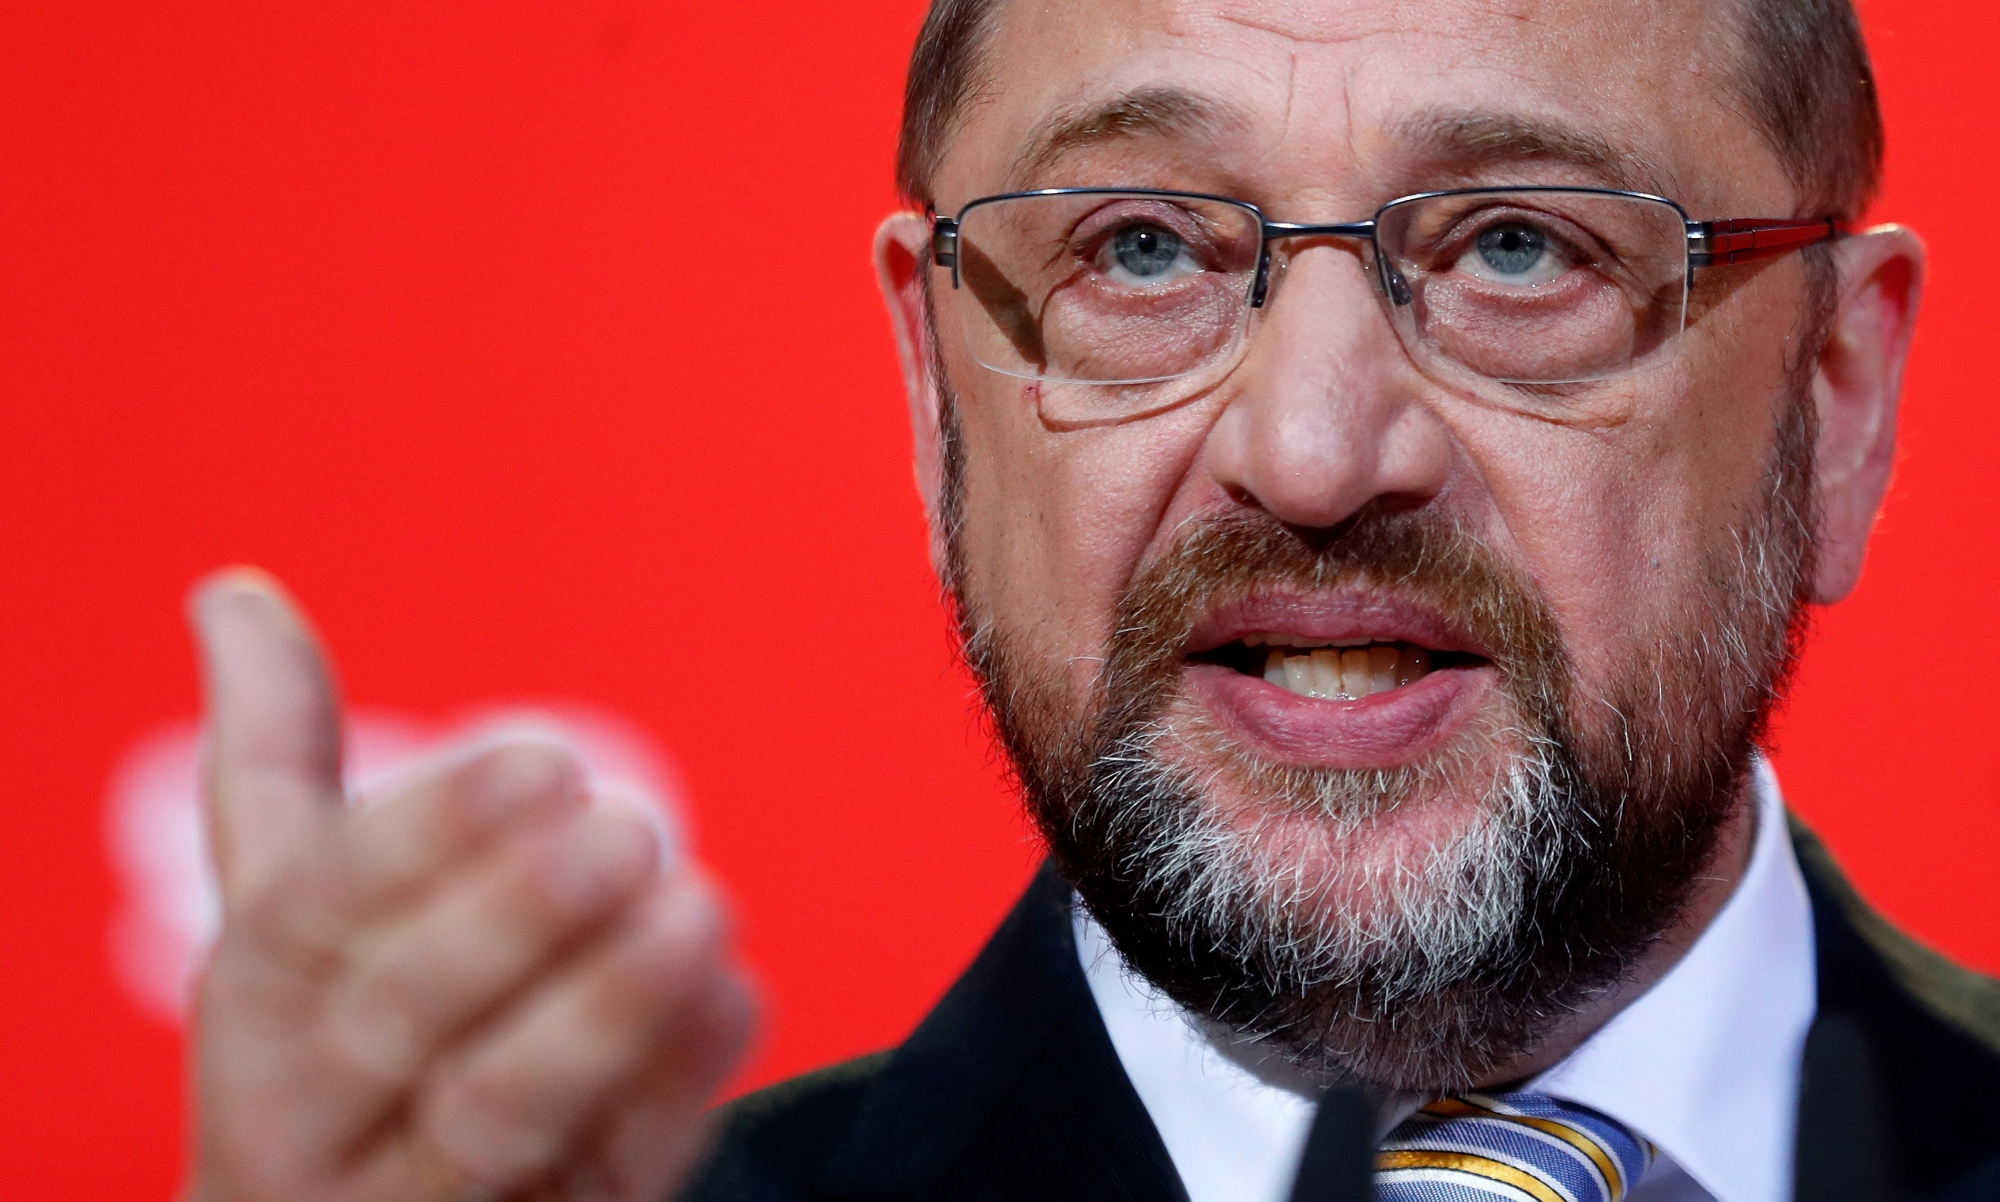 epa06354155 The leader of the German Social Democratic Party (SPD), Martin Schulz, speaks during a press conference after the party's board meeting at its headquarters in Berlin, Germany, 27 November 2017. The SPD discussed to start exploratory talks with the Christian Democratic Union (CDU) and explored the possibility of forming a grand coalition like in the last legislative period.  EPA/FELIPE TRUEBA GERMANY ELECTIONS 2017